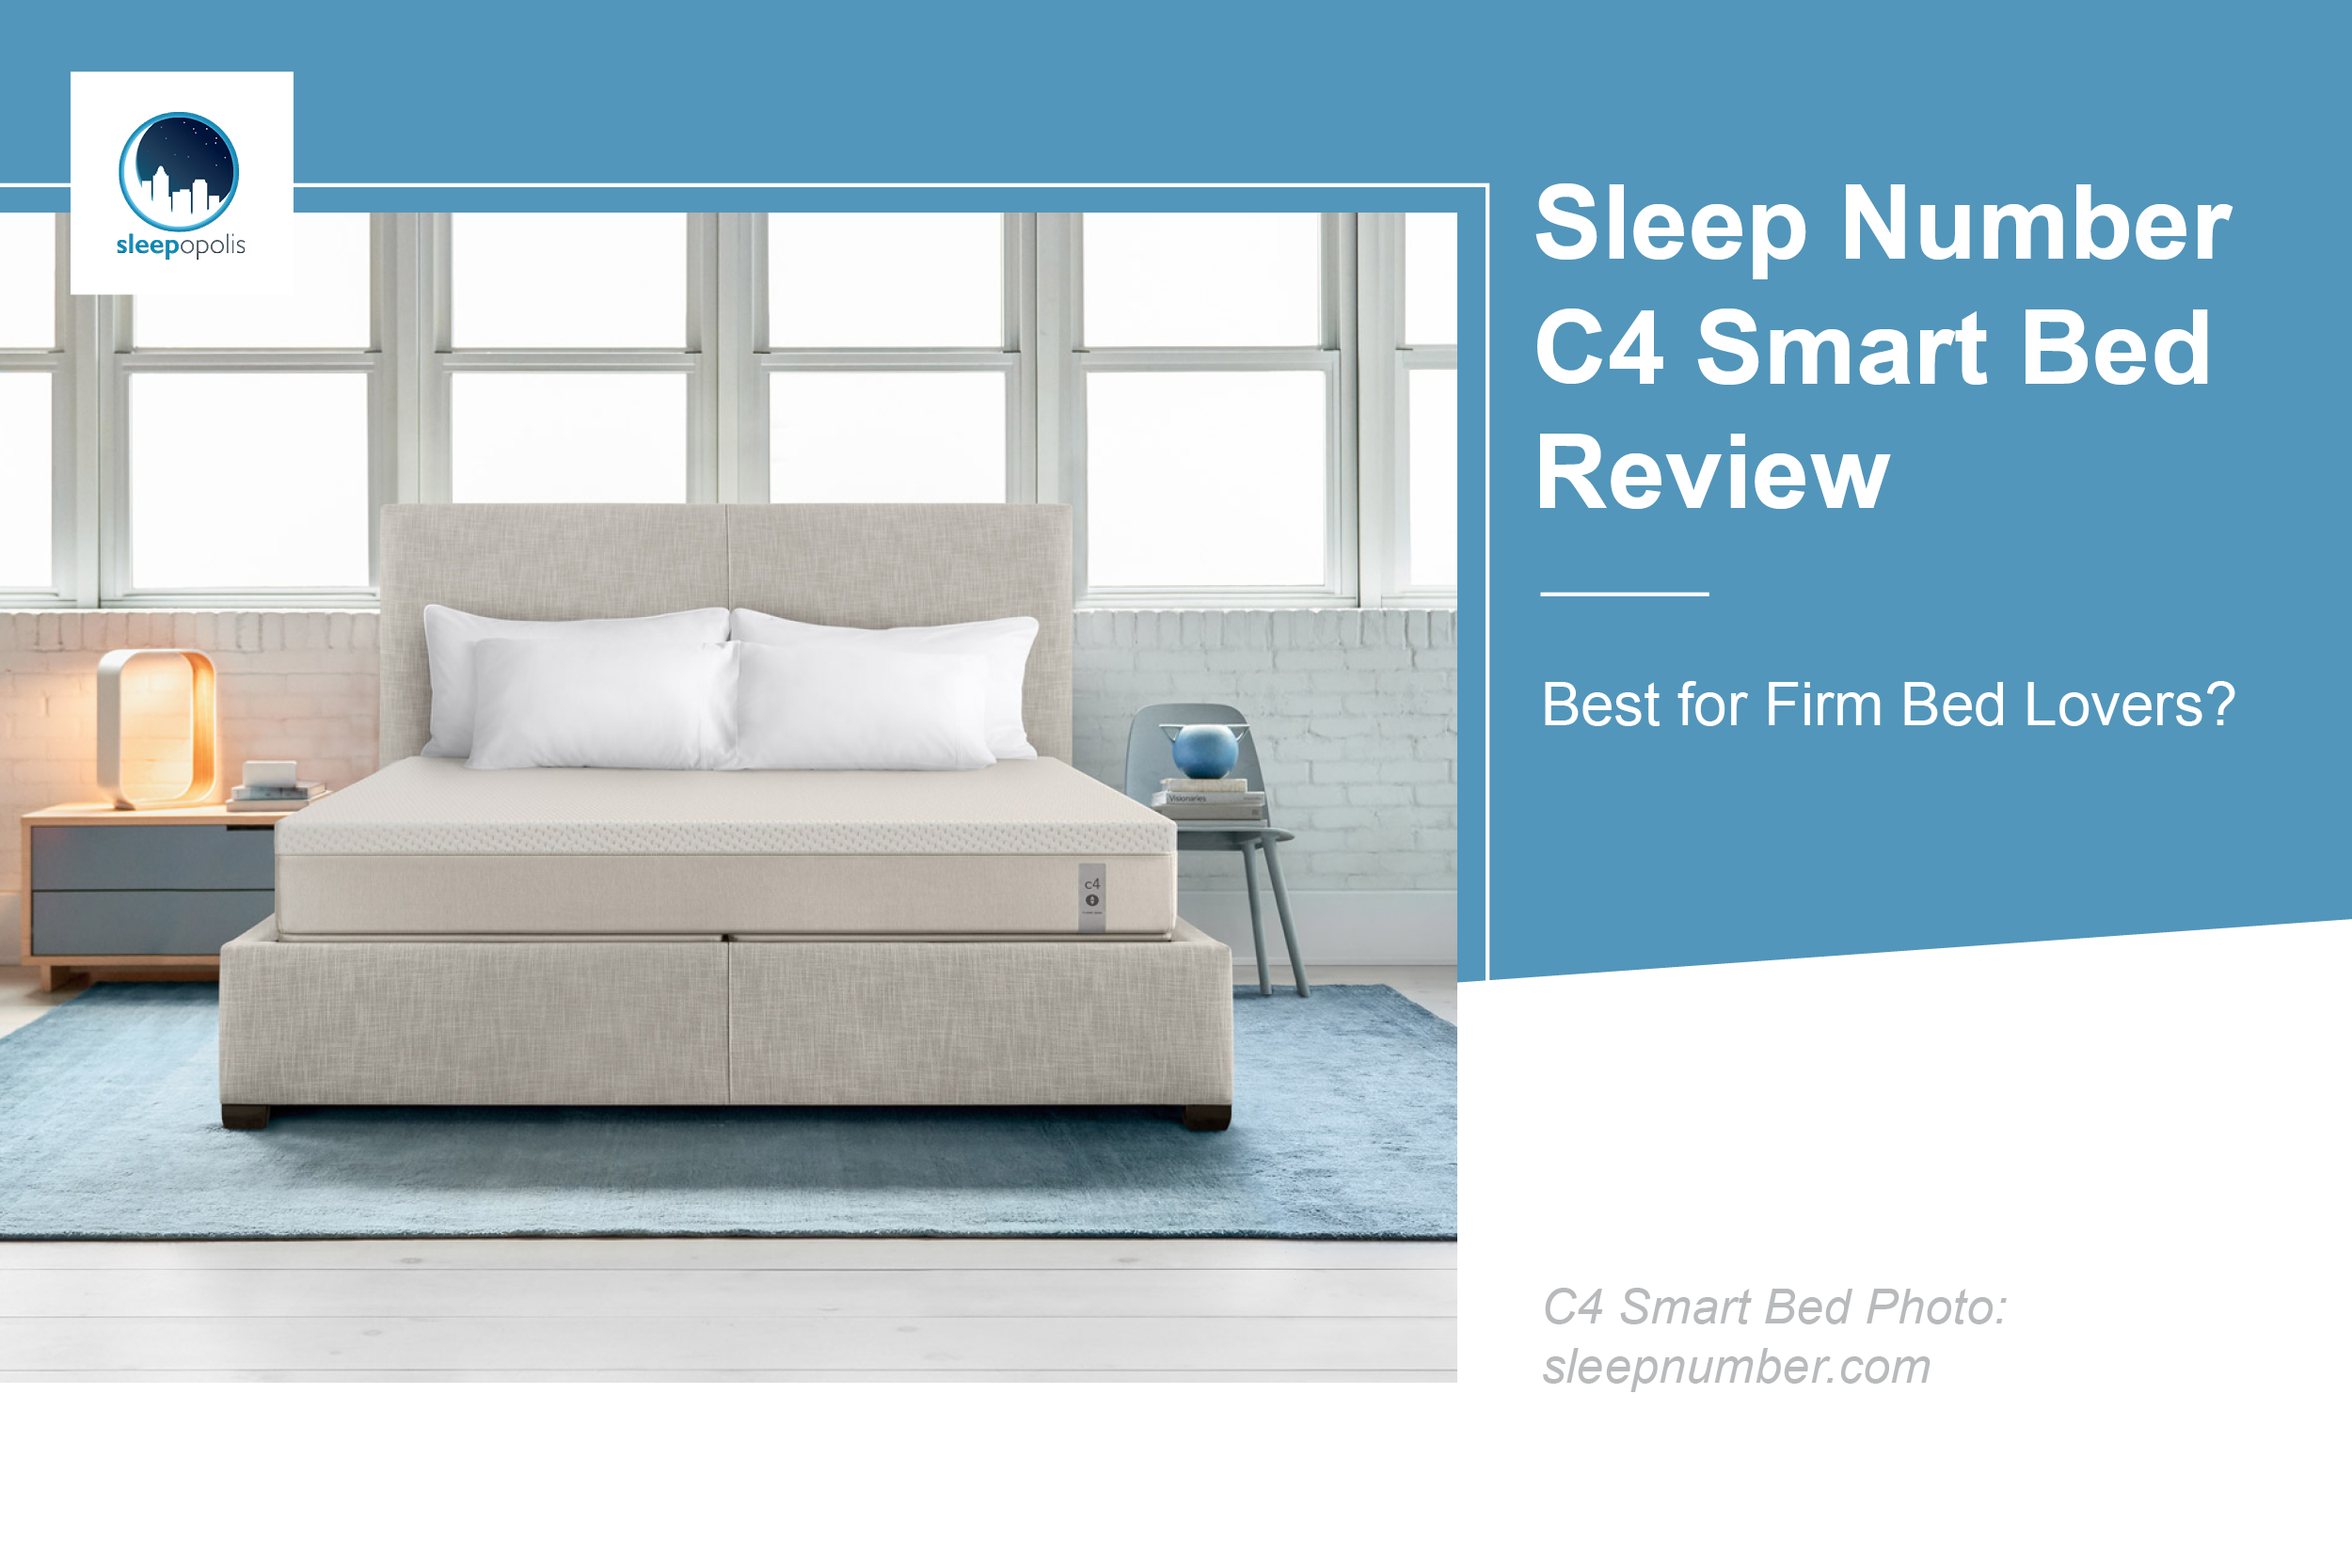 Sleep Number 360 C4 Smart Bed Review, Do Sleep Number Beds Come With A Headboard